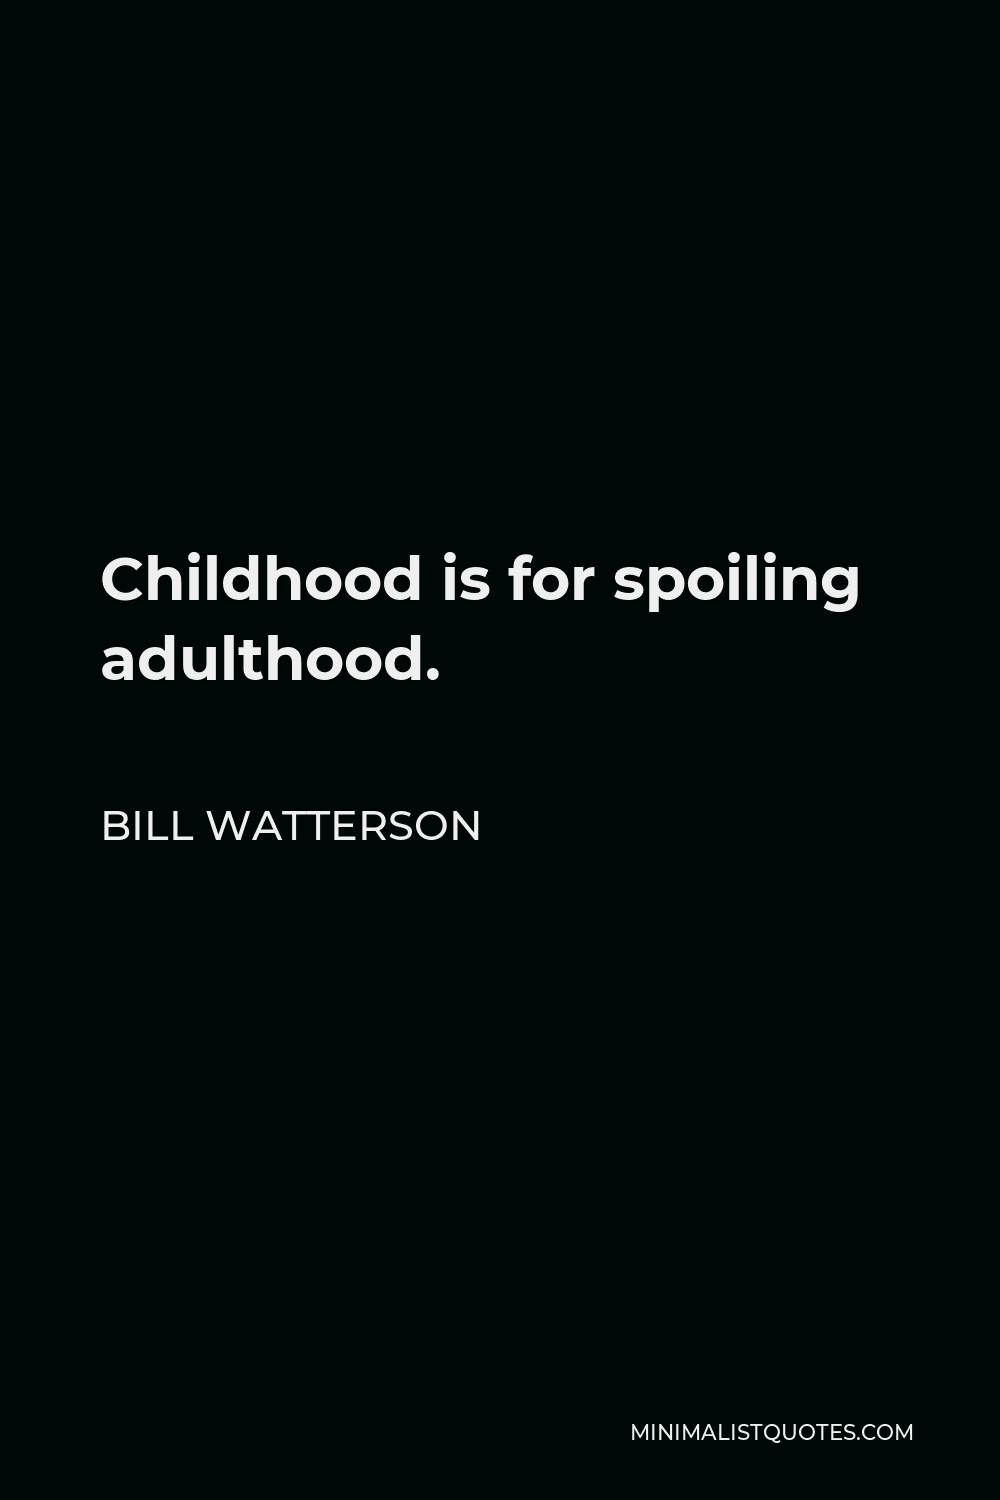 Bill Watterson Quote - Childhood is for spoiling adulthood.